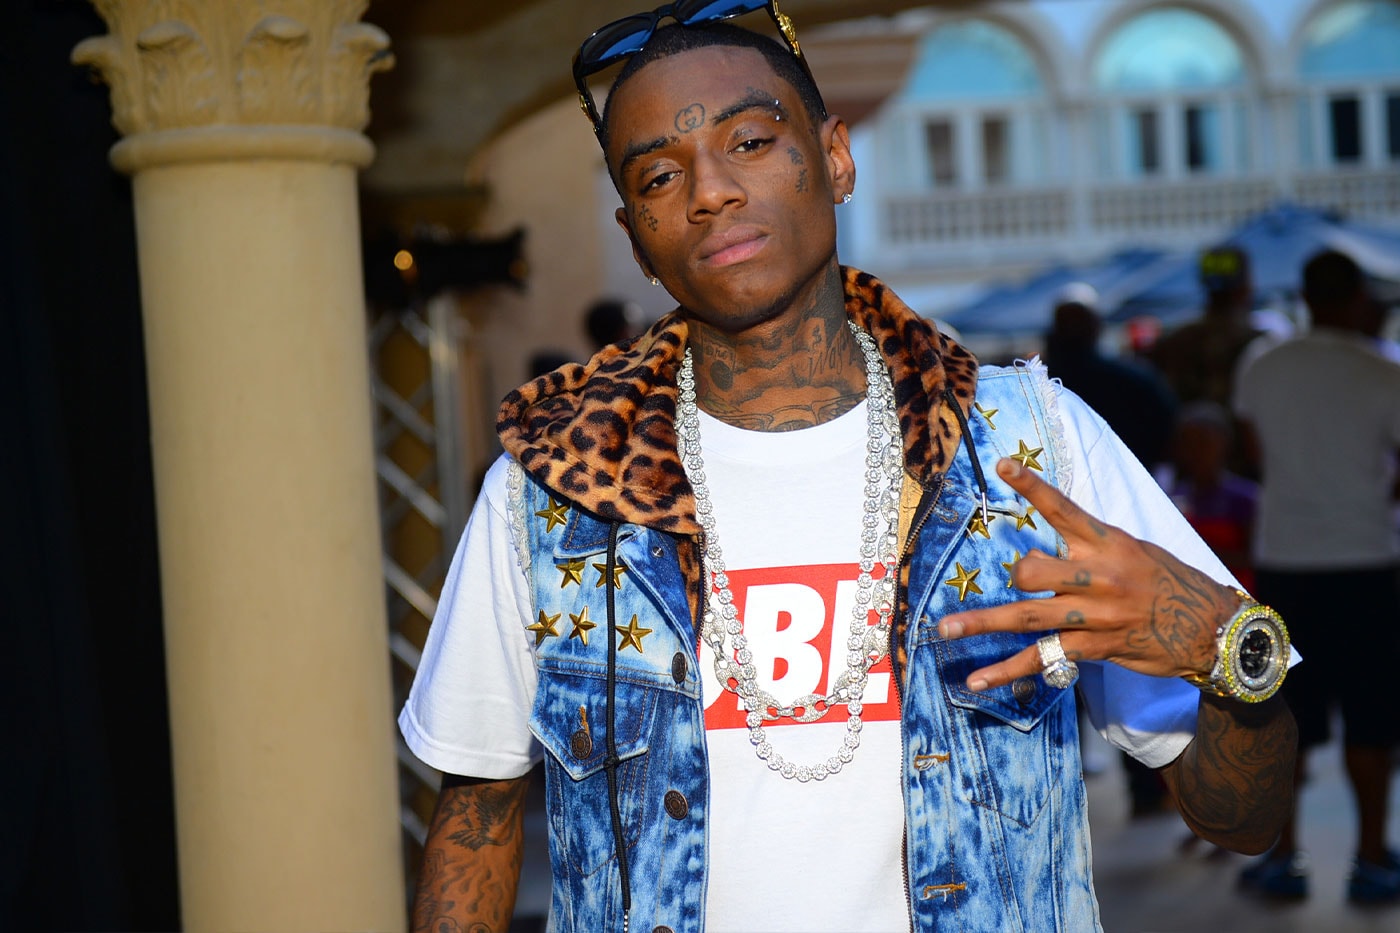 Soulja Boy Blames Kanye West After other Rappers Remove Him From Songs donda drink champs interview